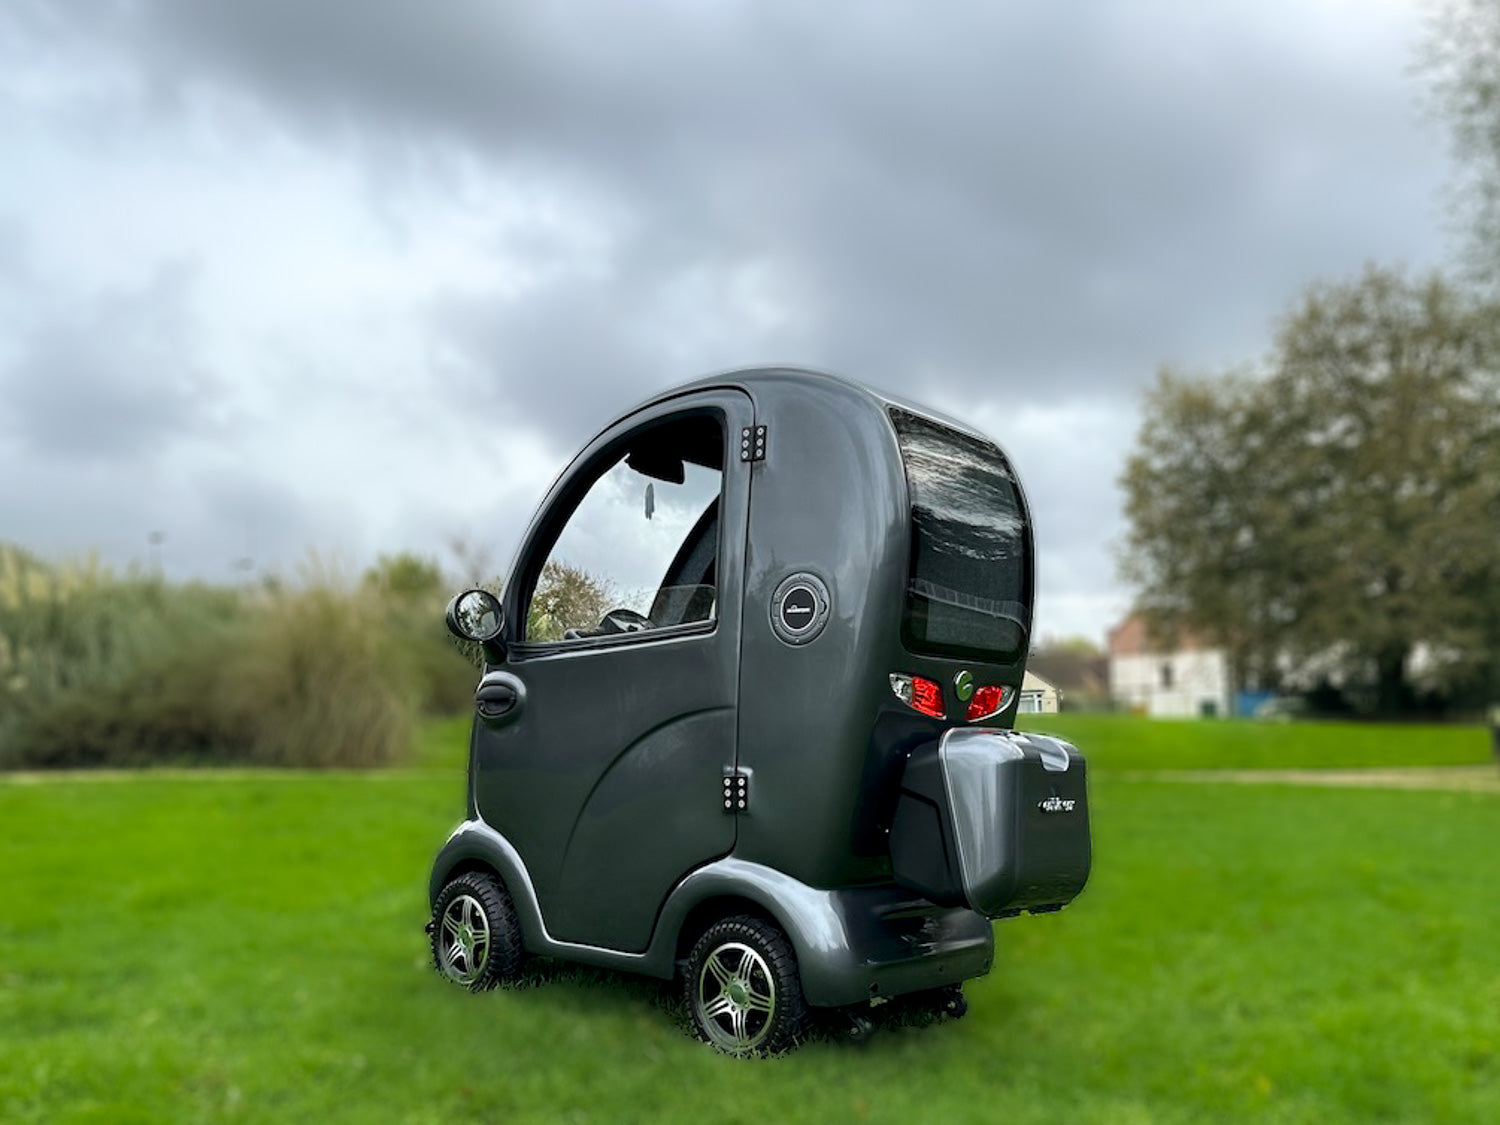 2021 Scooterpac Cabin Car MK2 8mph Covered Mobility Scooter Grey Road Legal